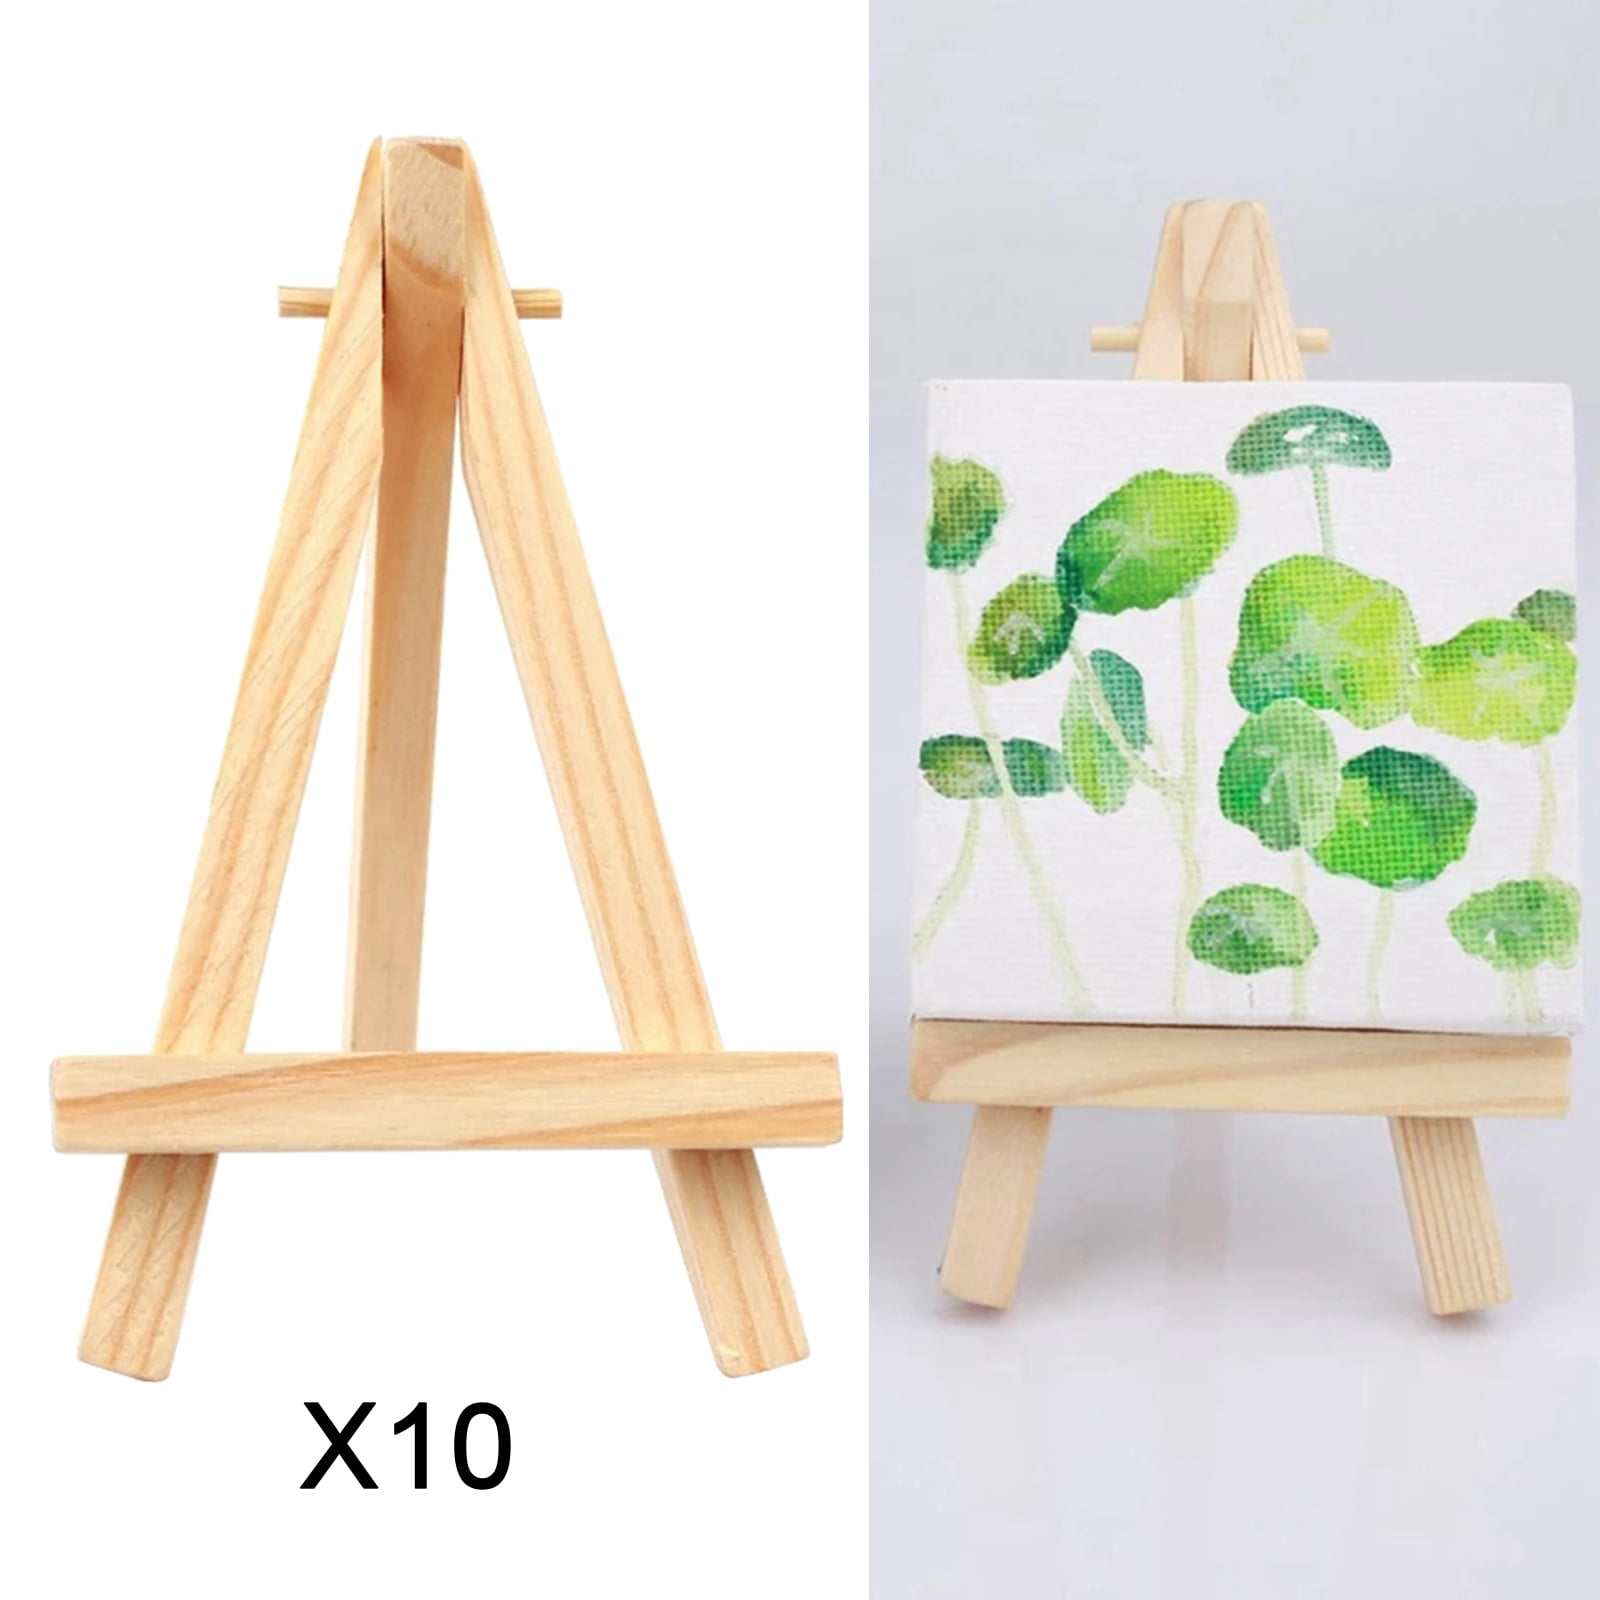  STOBOK 5pcs Game Card Holder Table Top Easels Picture Frame  Holder Stand Small Picture Stand Display Easel Stand Tabletop Holder Stand  Small Canvases Easel Table Display Easel Wood Child